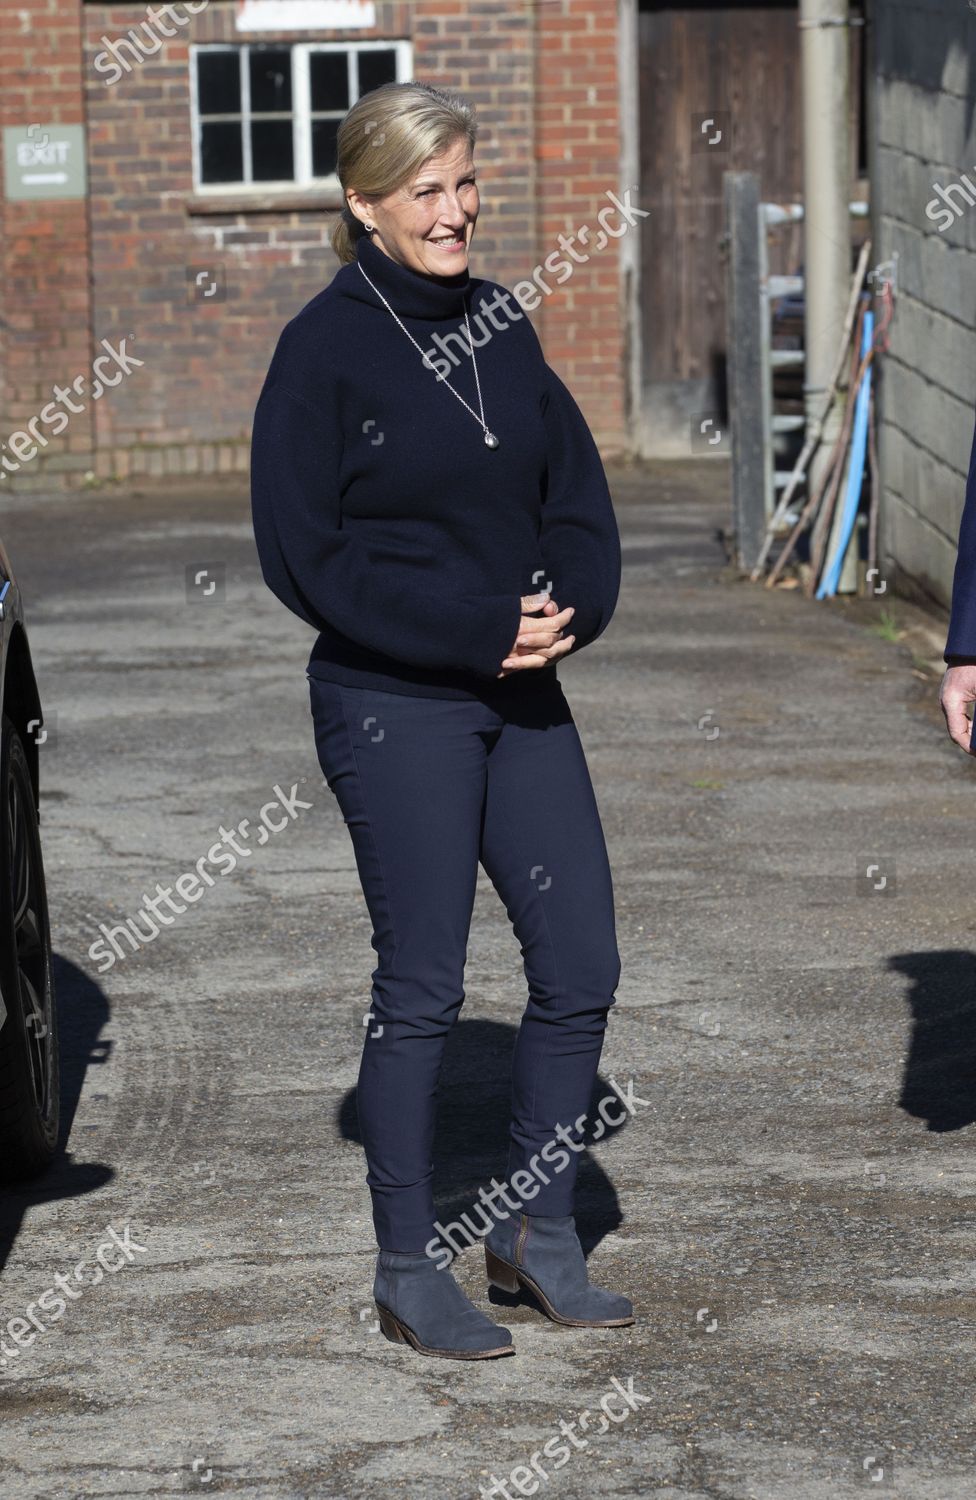 sophie-countess-of-wessex-visit-to-coverwood-farm-surrey-uk-shutterstock-editorial-10787745ak.jpg